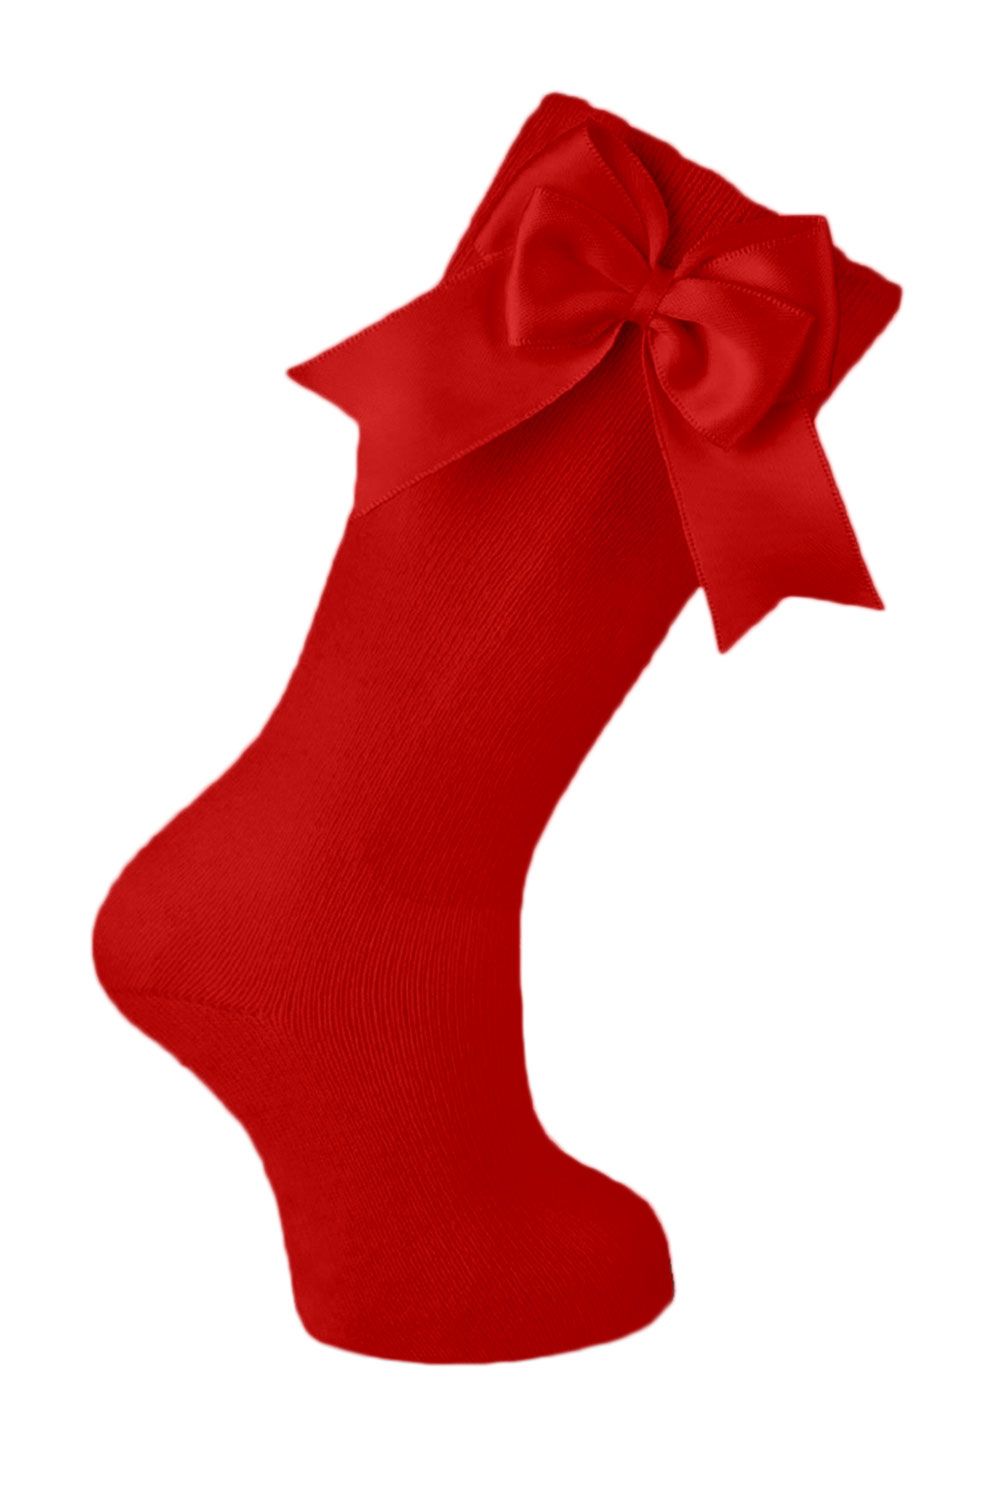 Carlomagno Cotton Knee Sock with Double Red Bow